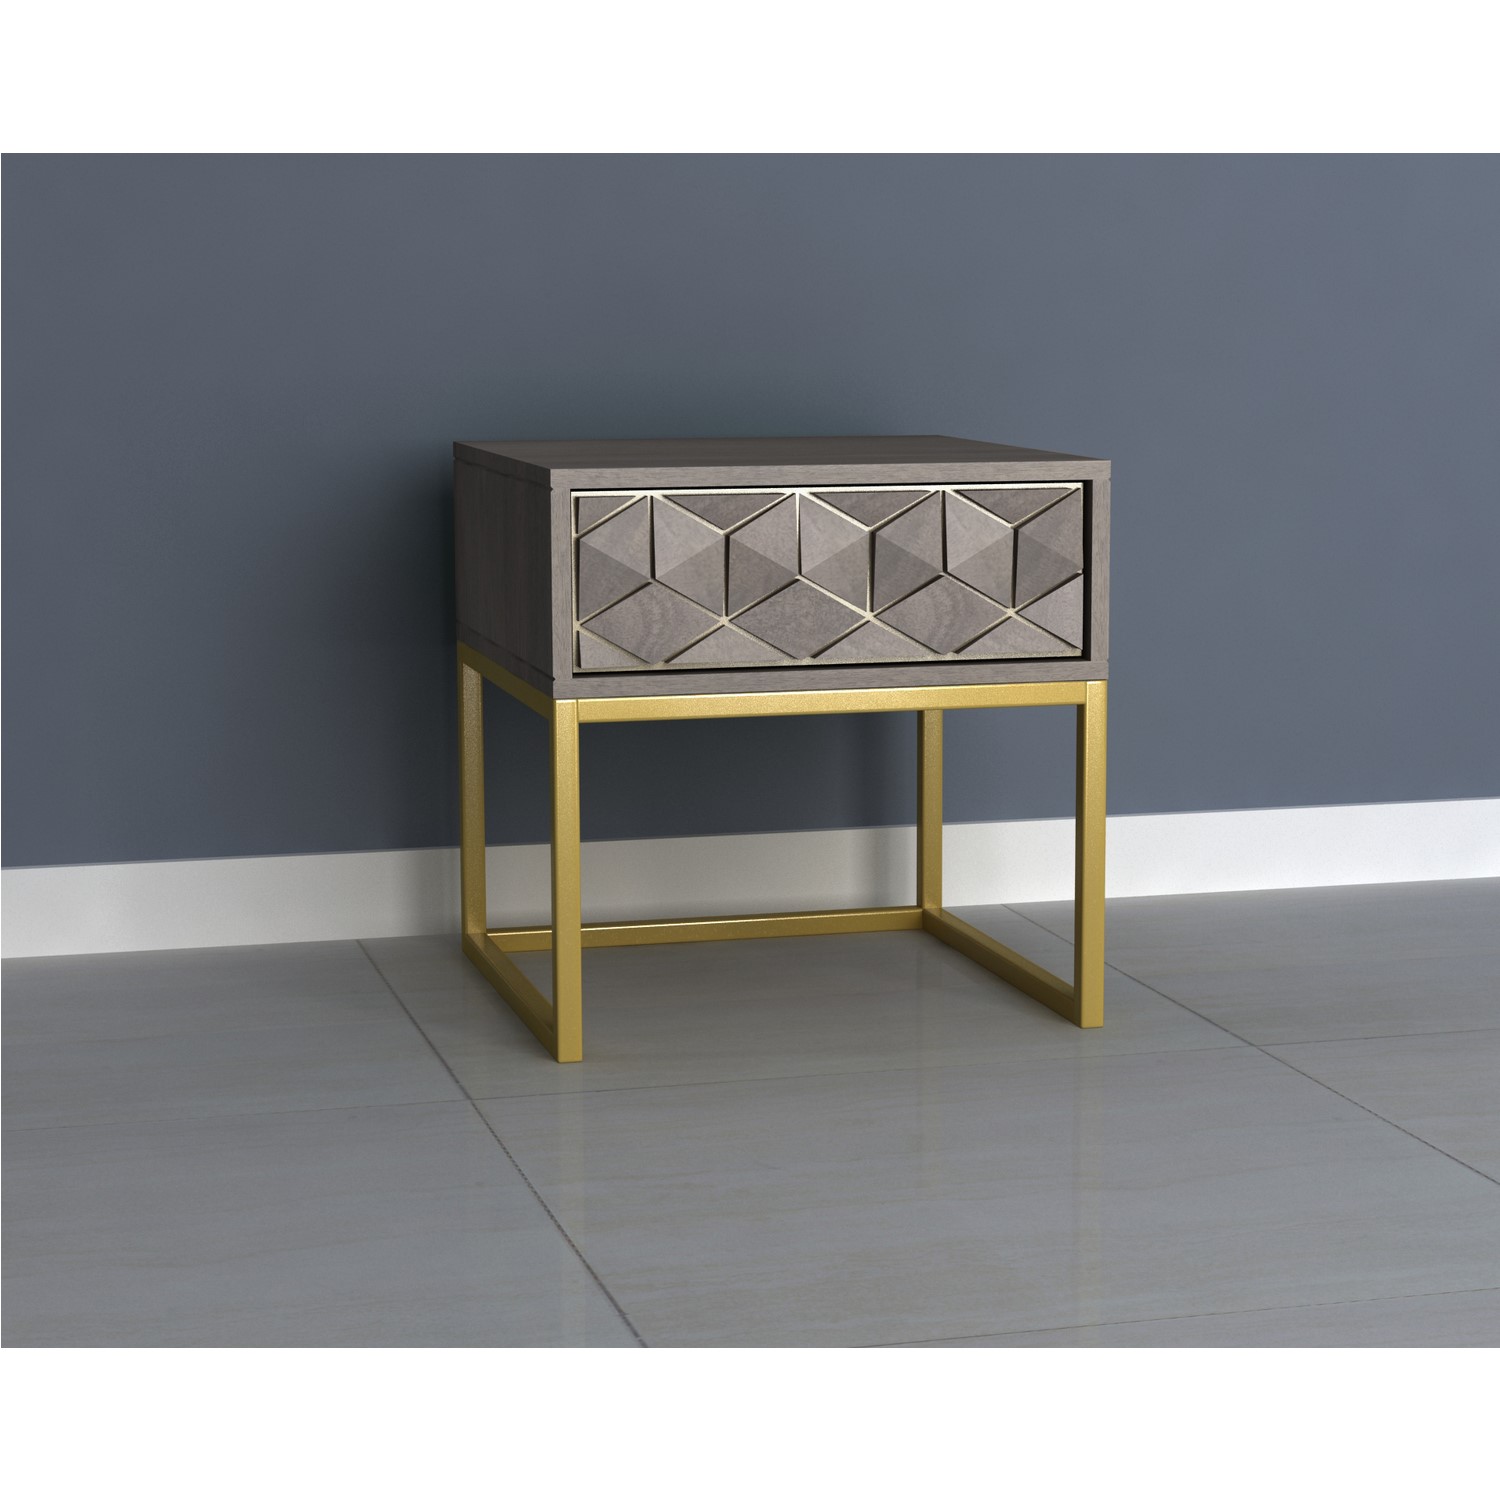 Read more about Grey wash side table with gold legs and storage drawer alice